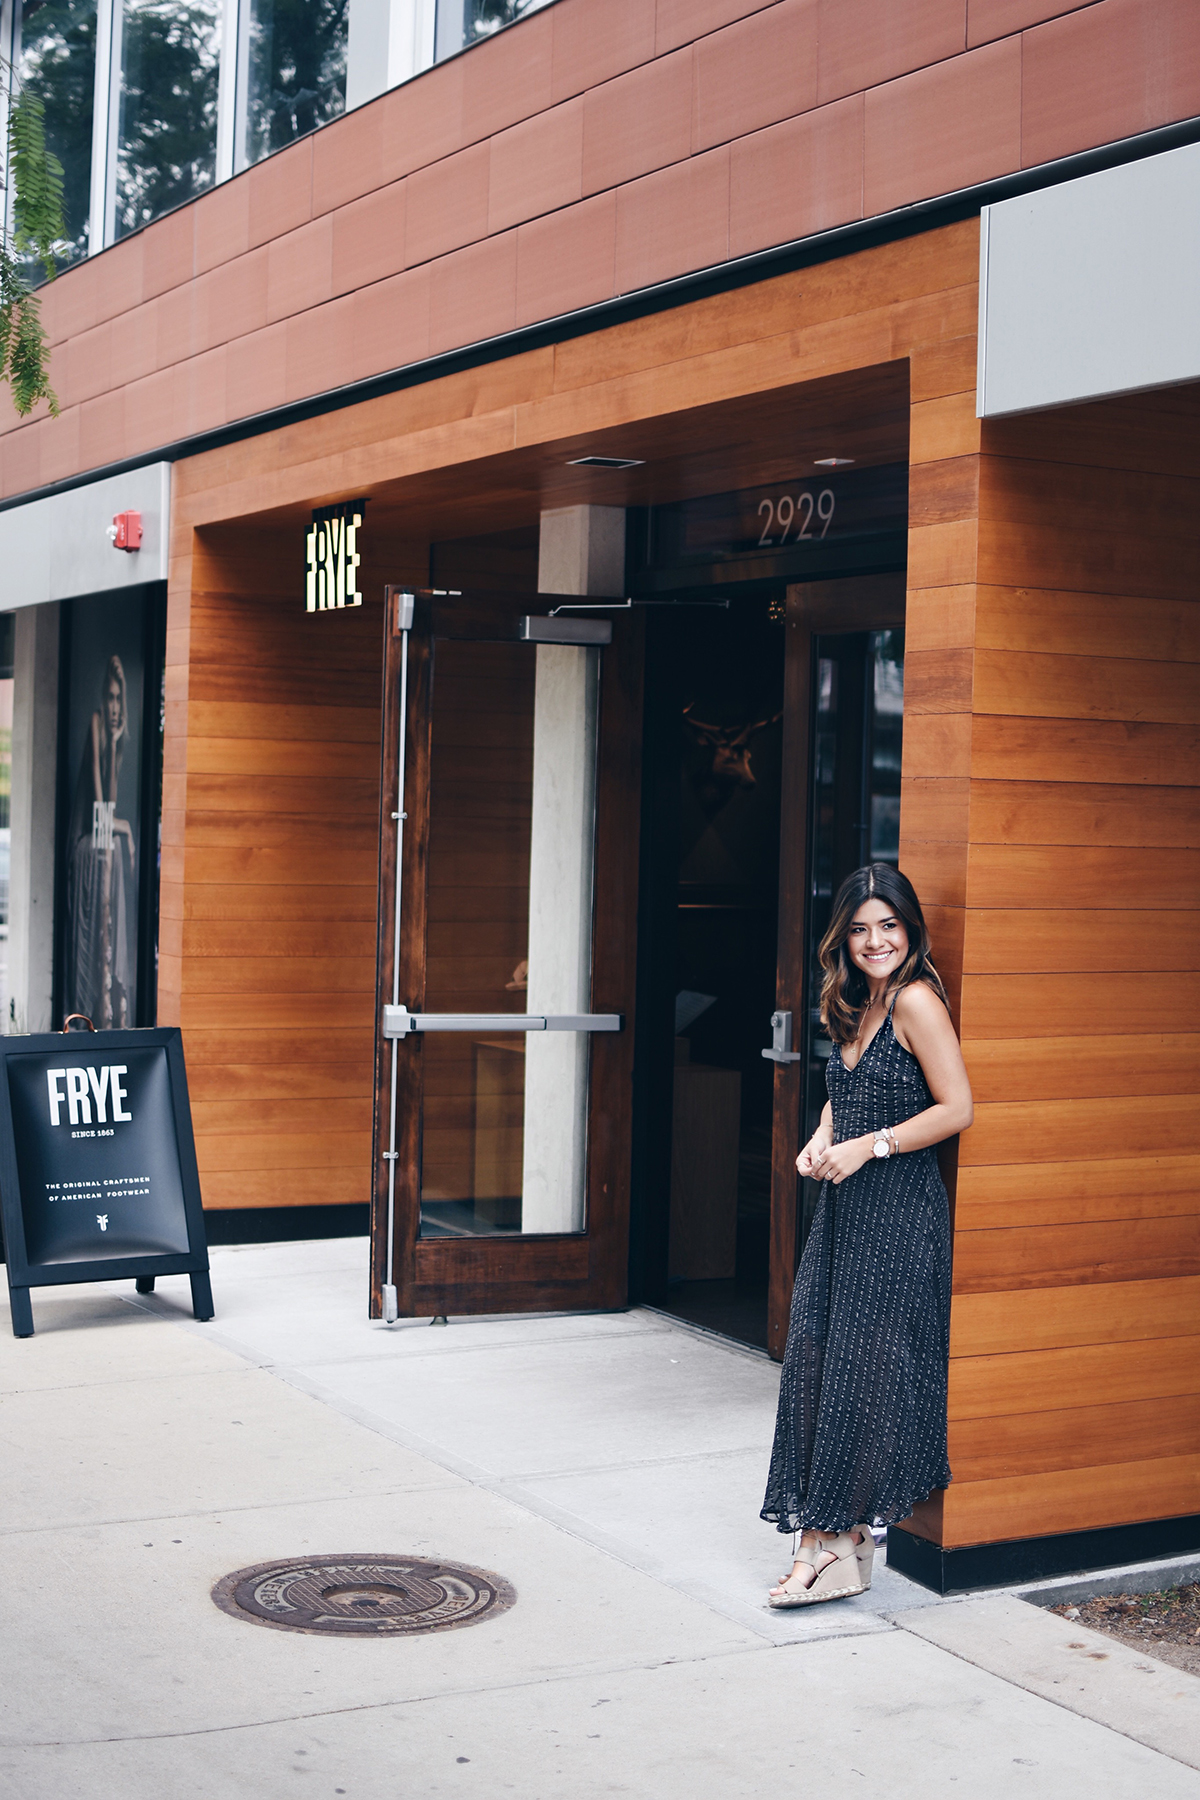 Frye Summer Styling event with Blogger Carolina Hellal of Chic Talk